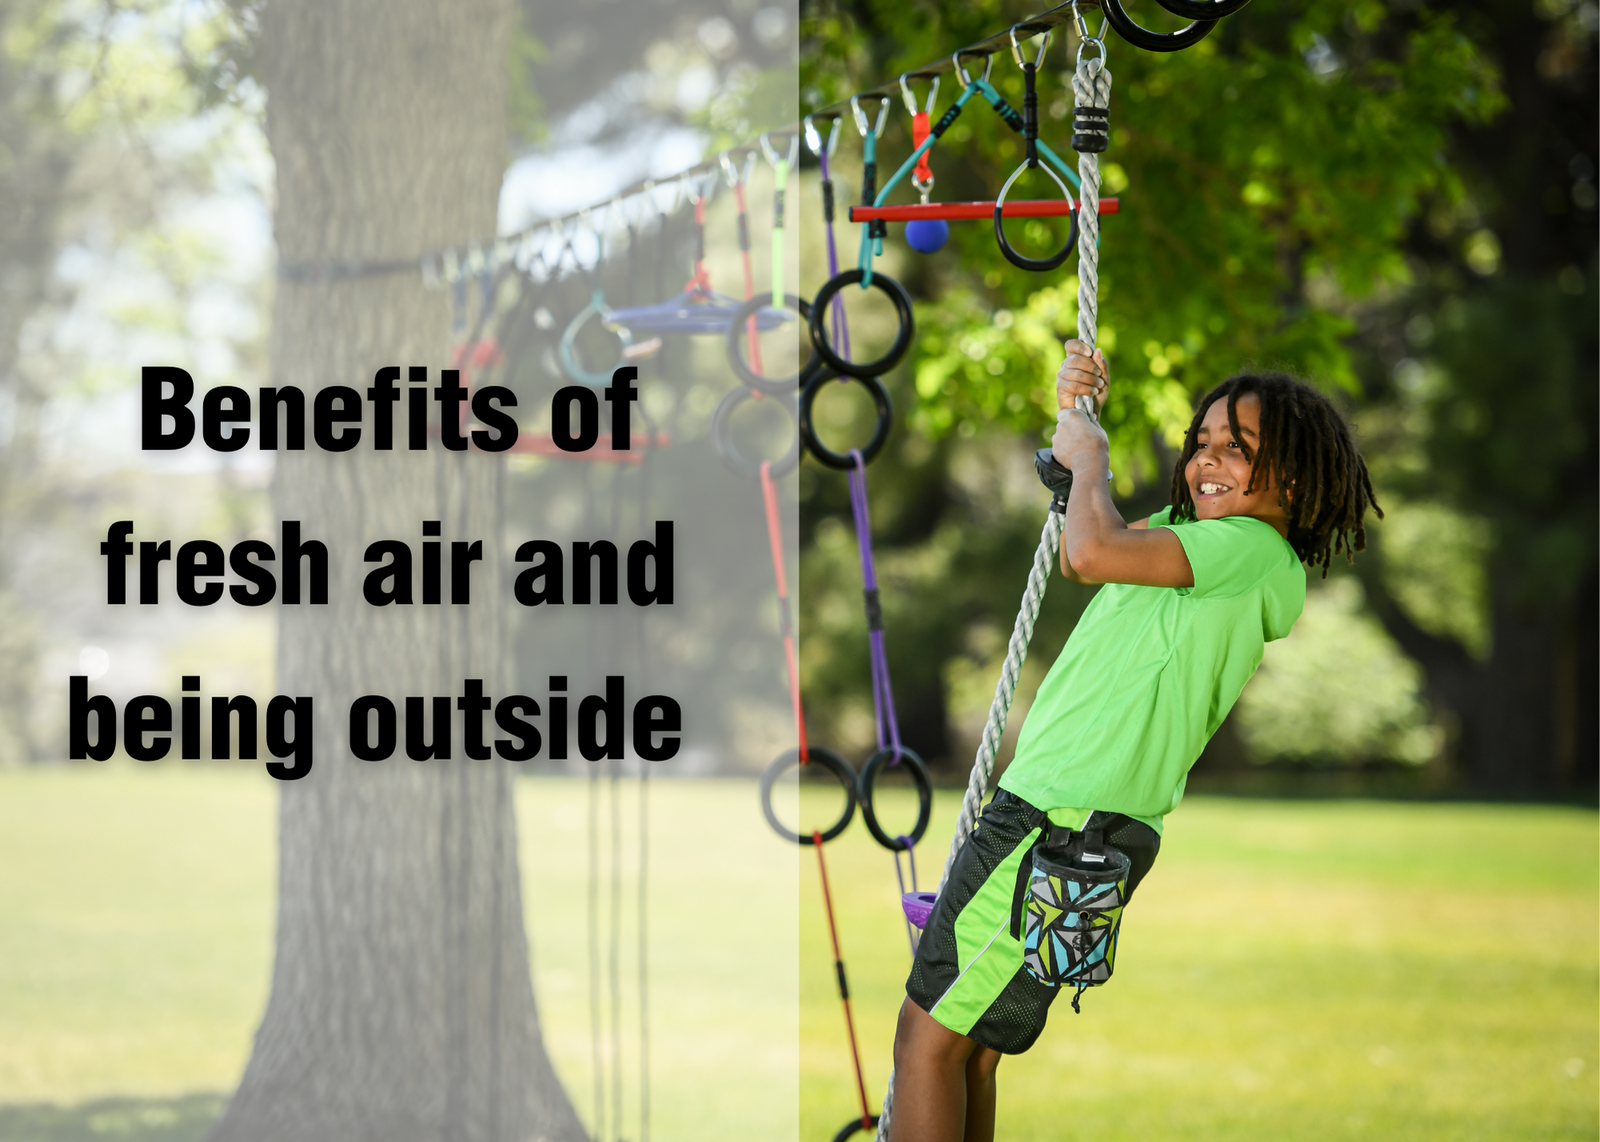 The Benefits of Fresh Air and Being Outside